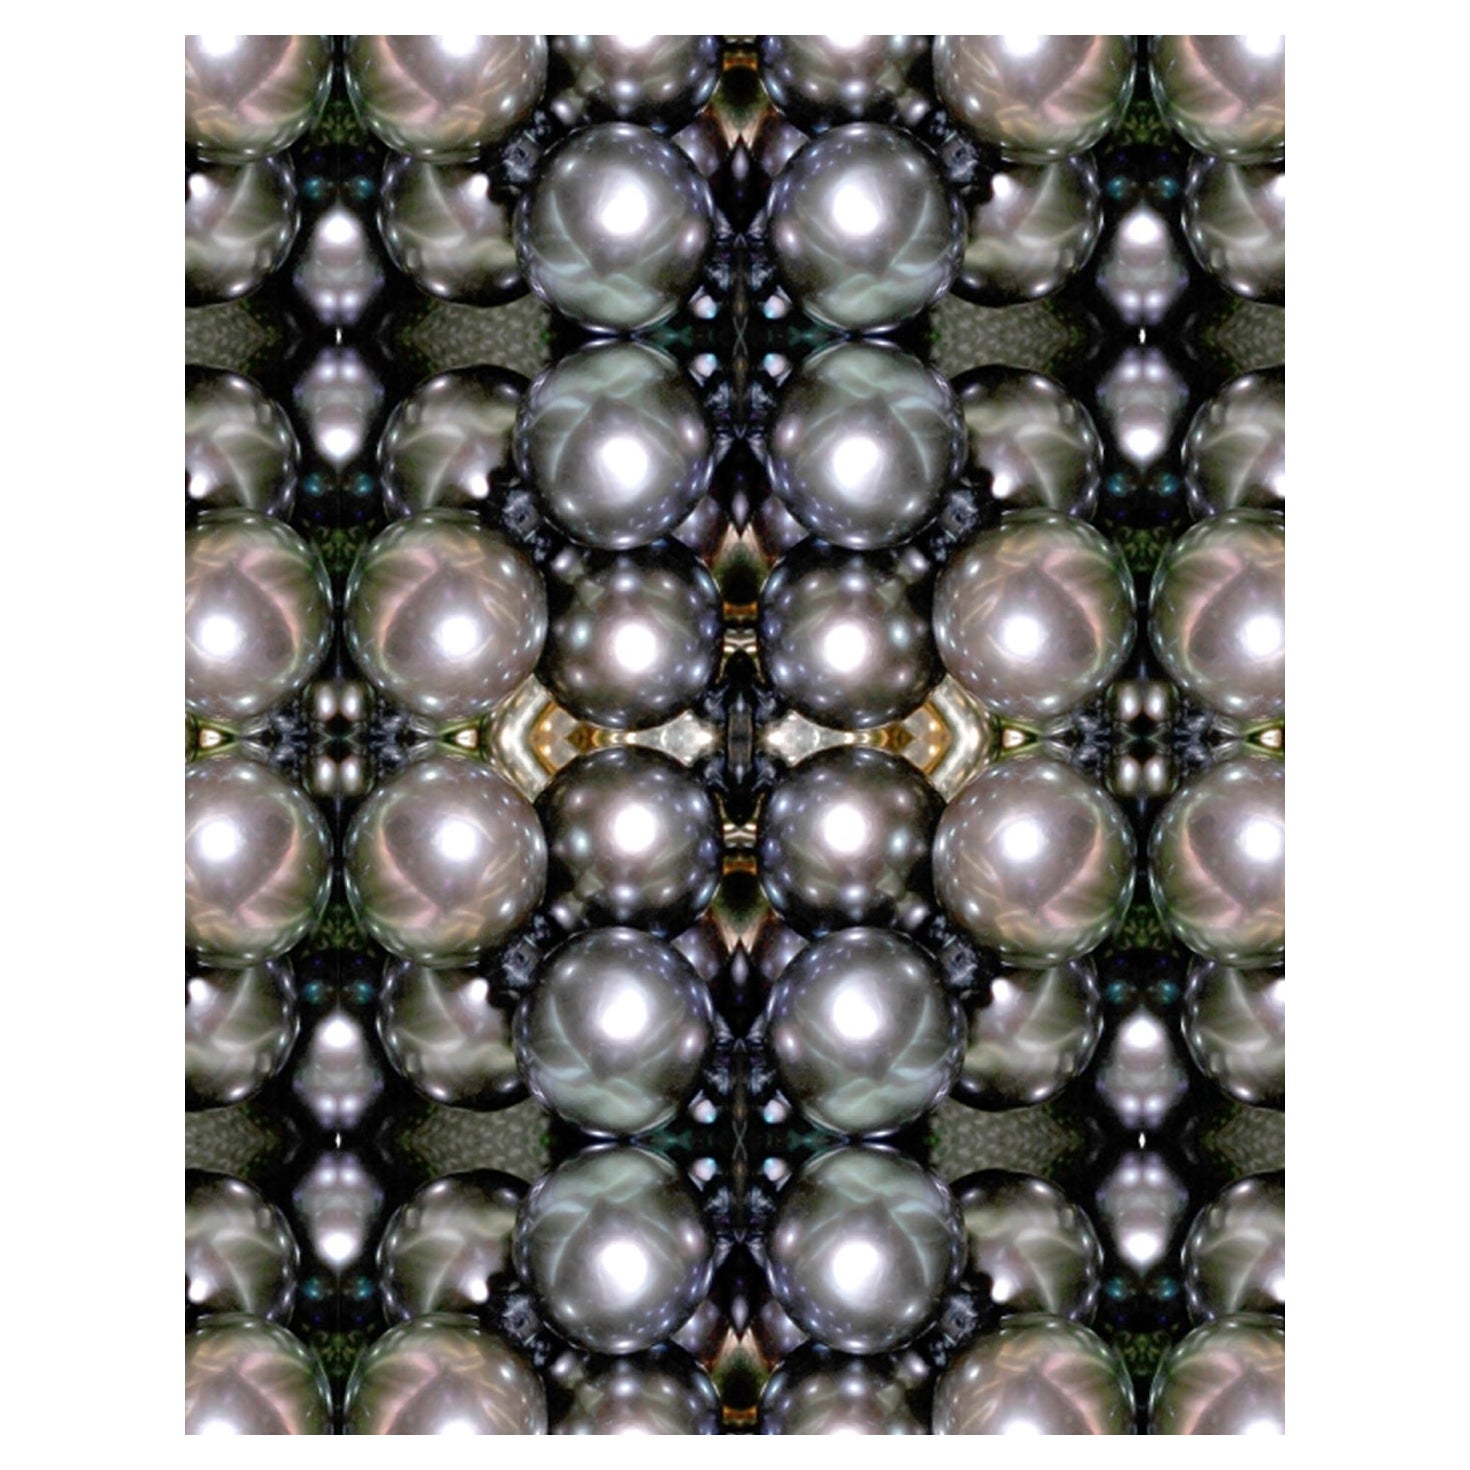 EDGE Collections Overlapping Black Pearls Light Grey from our Collection no. 1